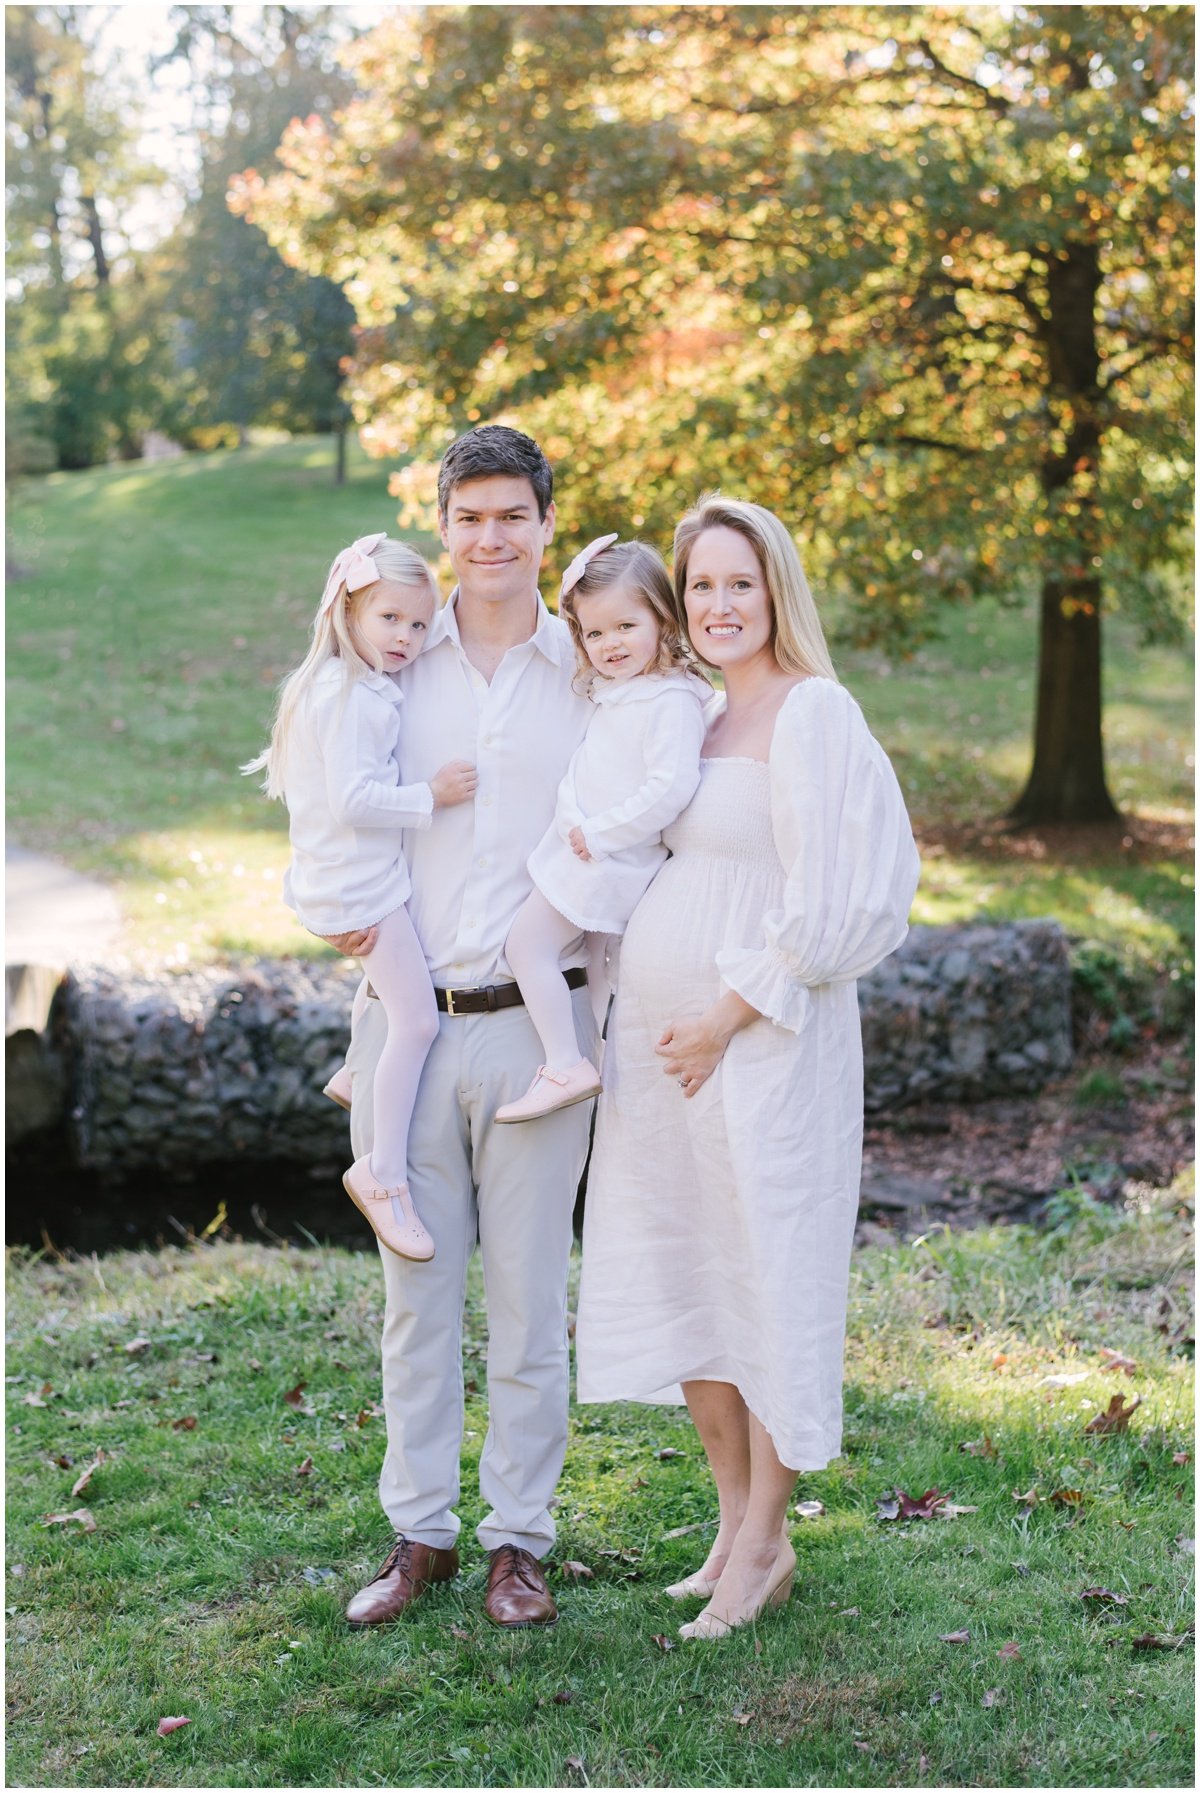 Mom, dad, and two daughters posing during fall family photoshoot | NKB Photo